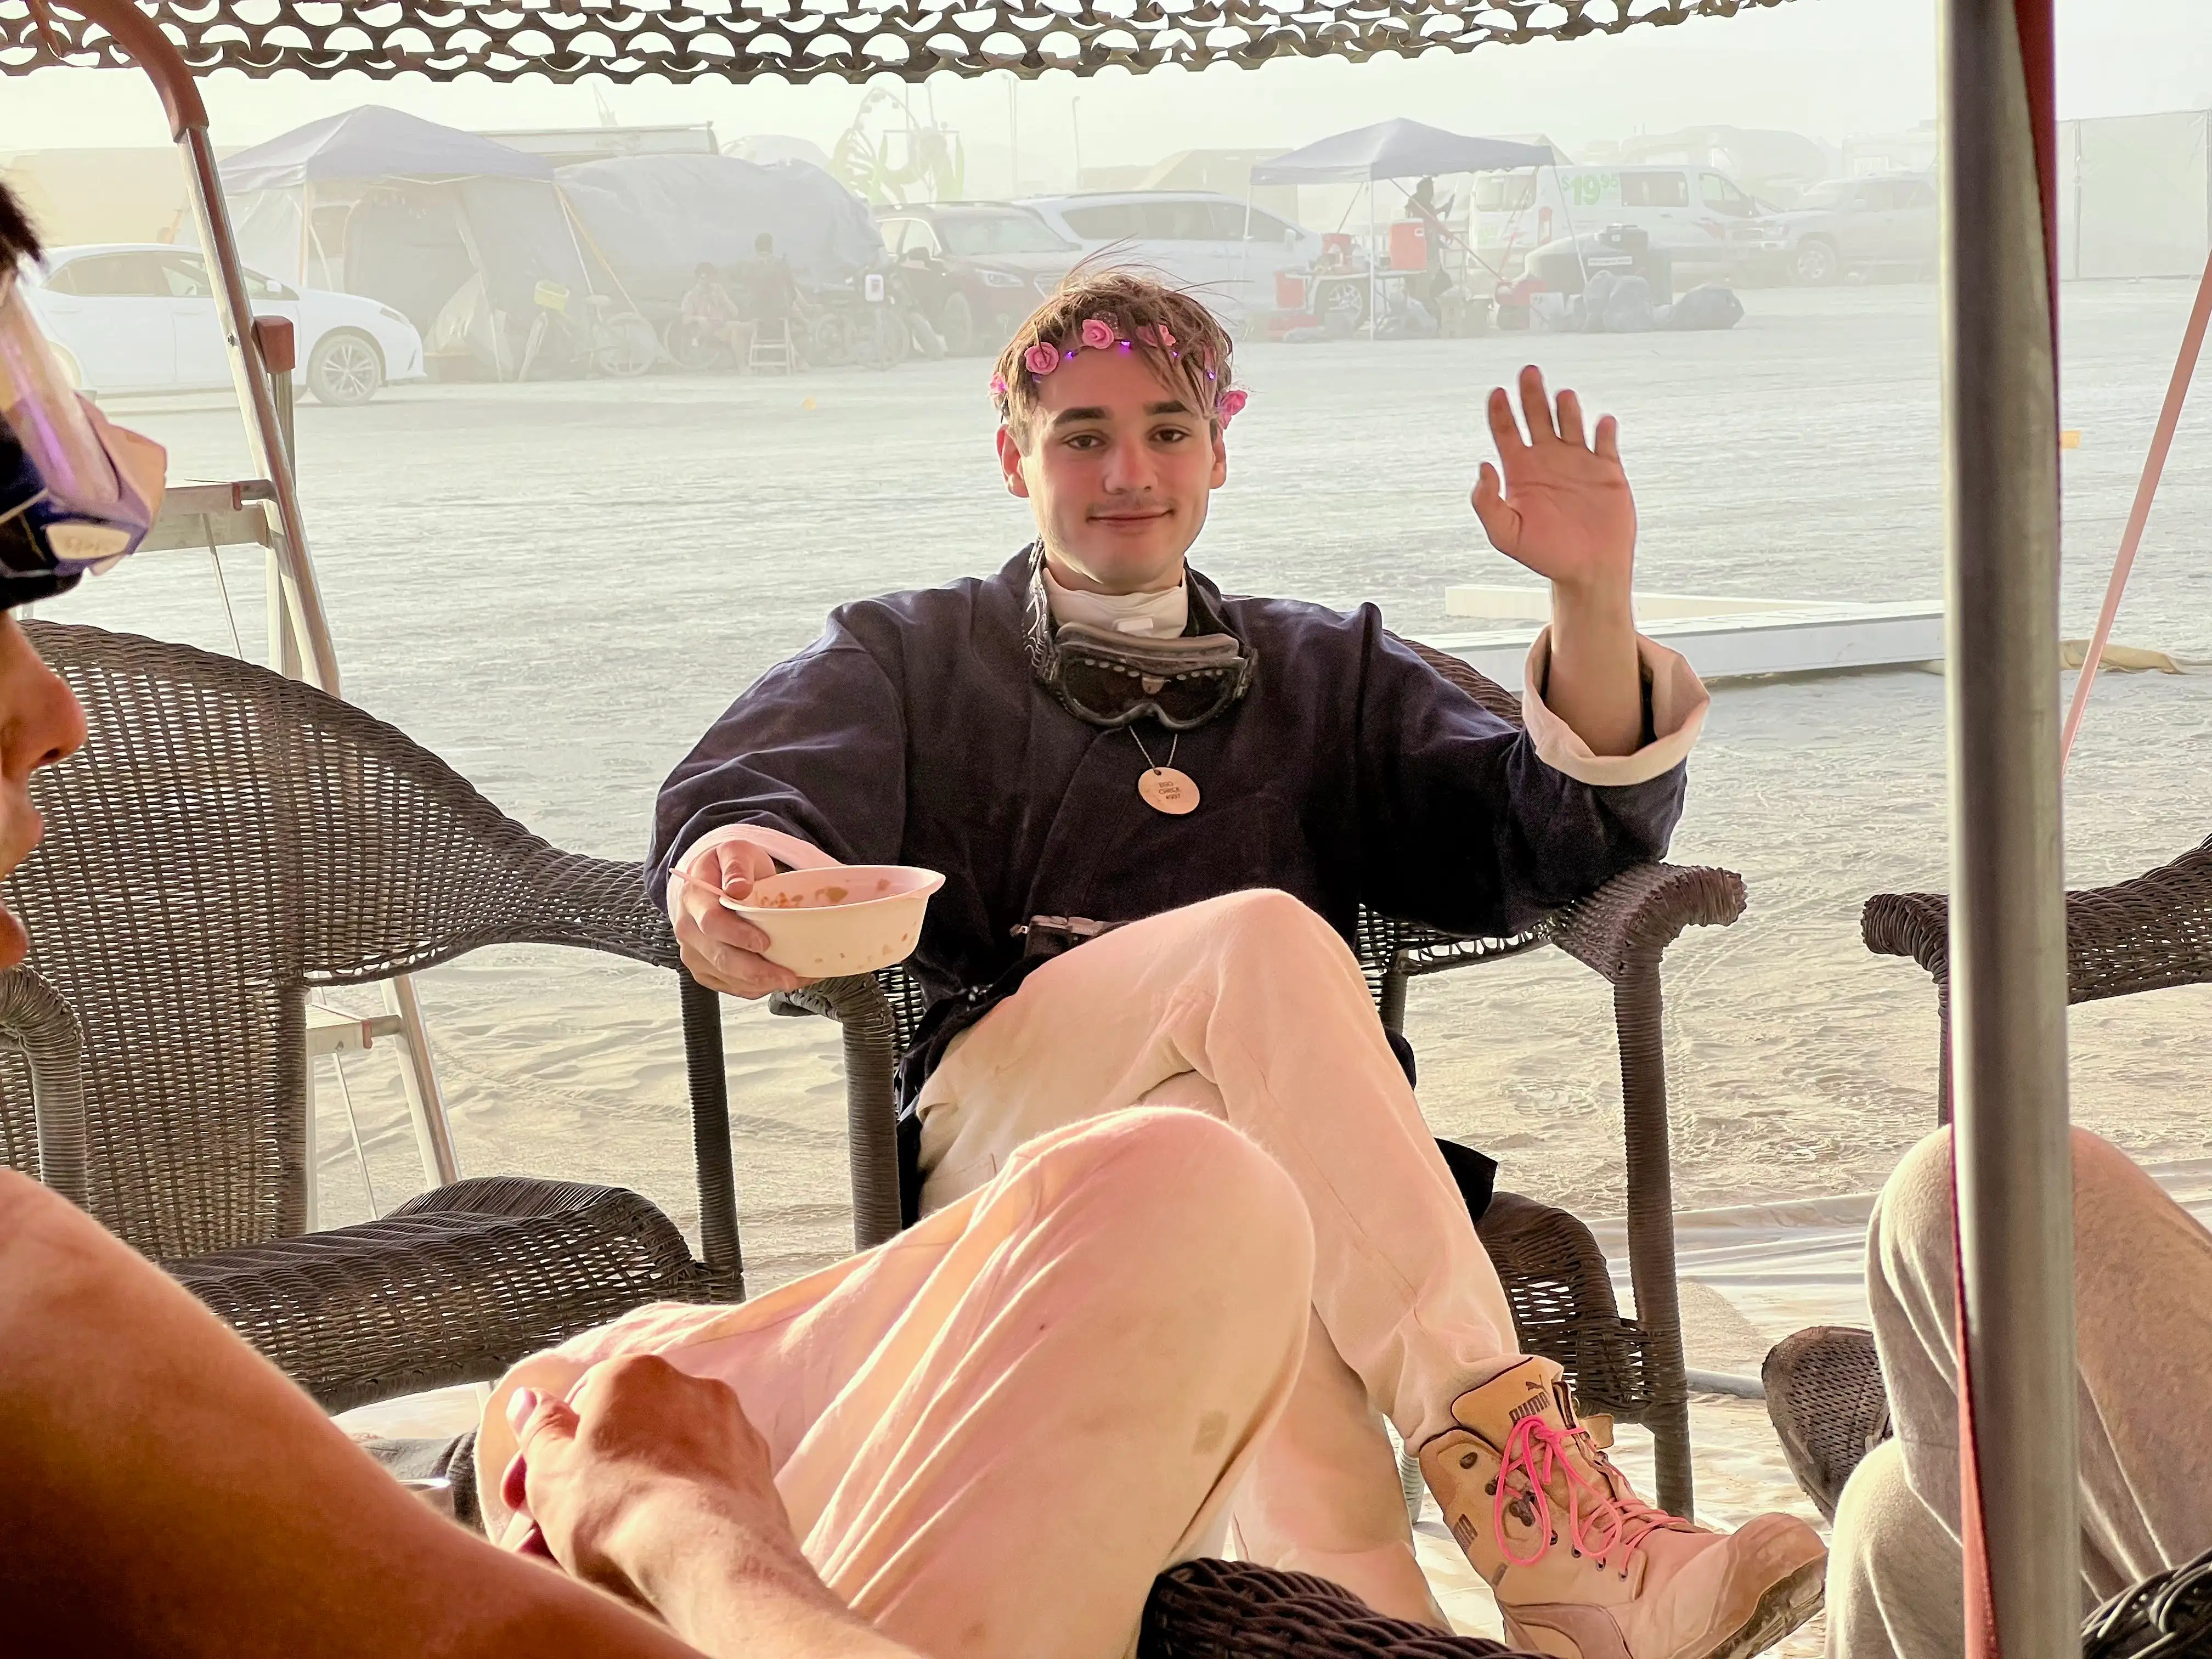 A young man sitting in the shade at the Future Turtles eating a bowl of something and waving at the camera. He is wearing an LED rose tiara, long-sleeved black shirt, white long trousers and ankle high leather boots with bright flourescent shoelaces. He has steampunk goggles and an N-95 mask around his neck and a necklace with a round pendant labeled Ego Check. In the background, it is clearly a dusty day as the camp across the street is barely visible.